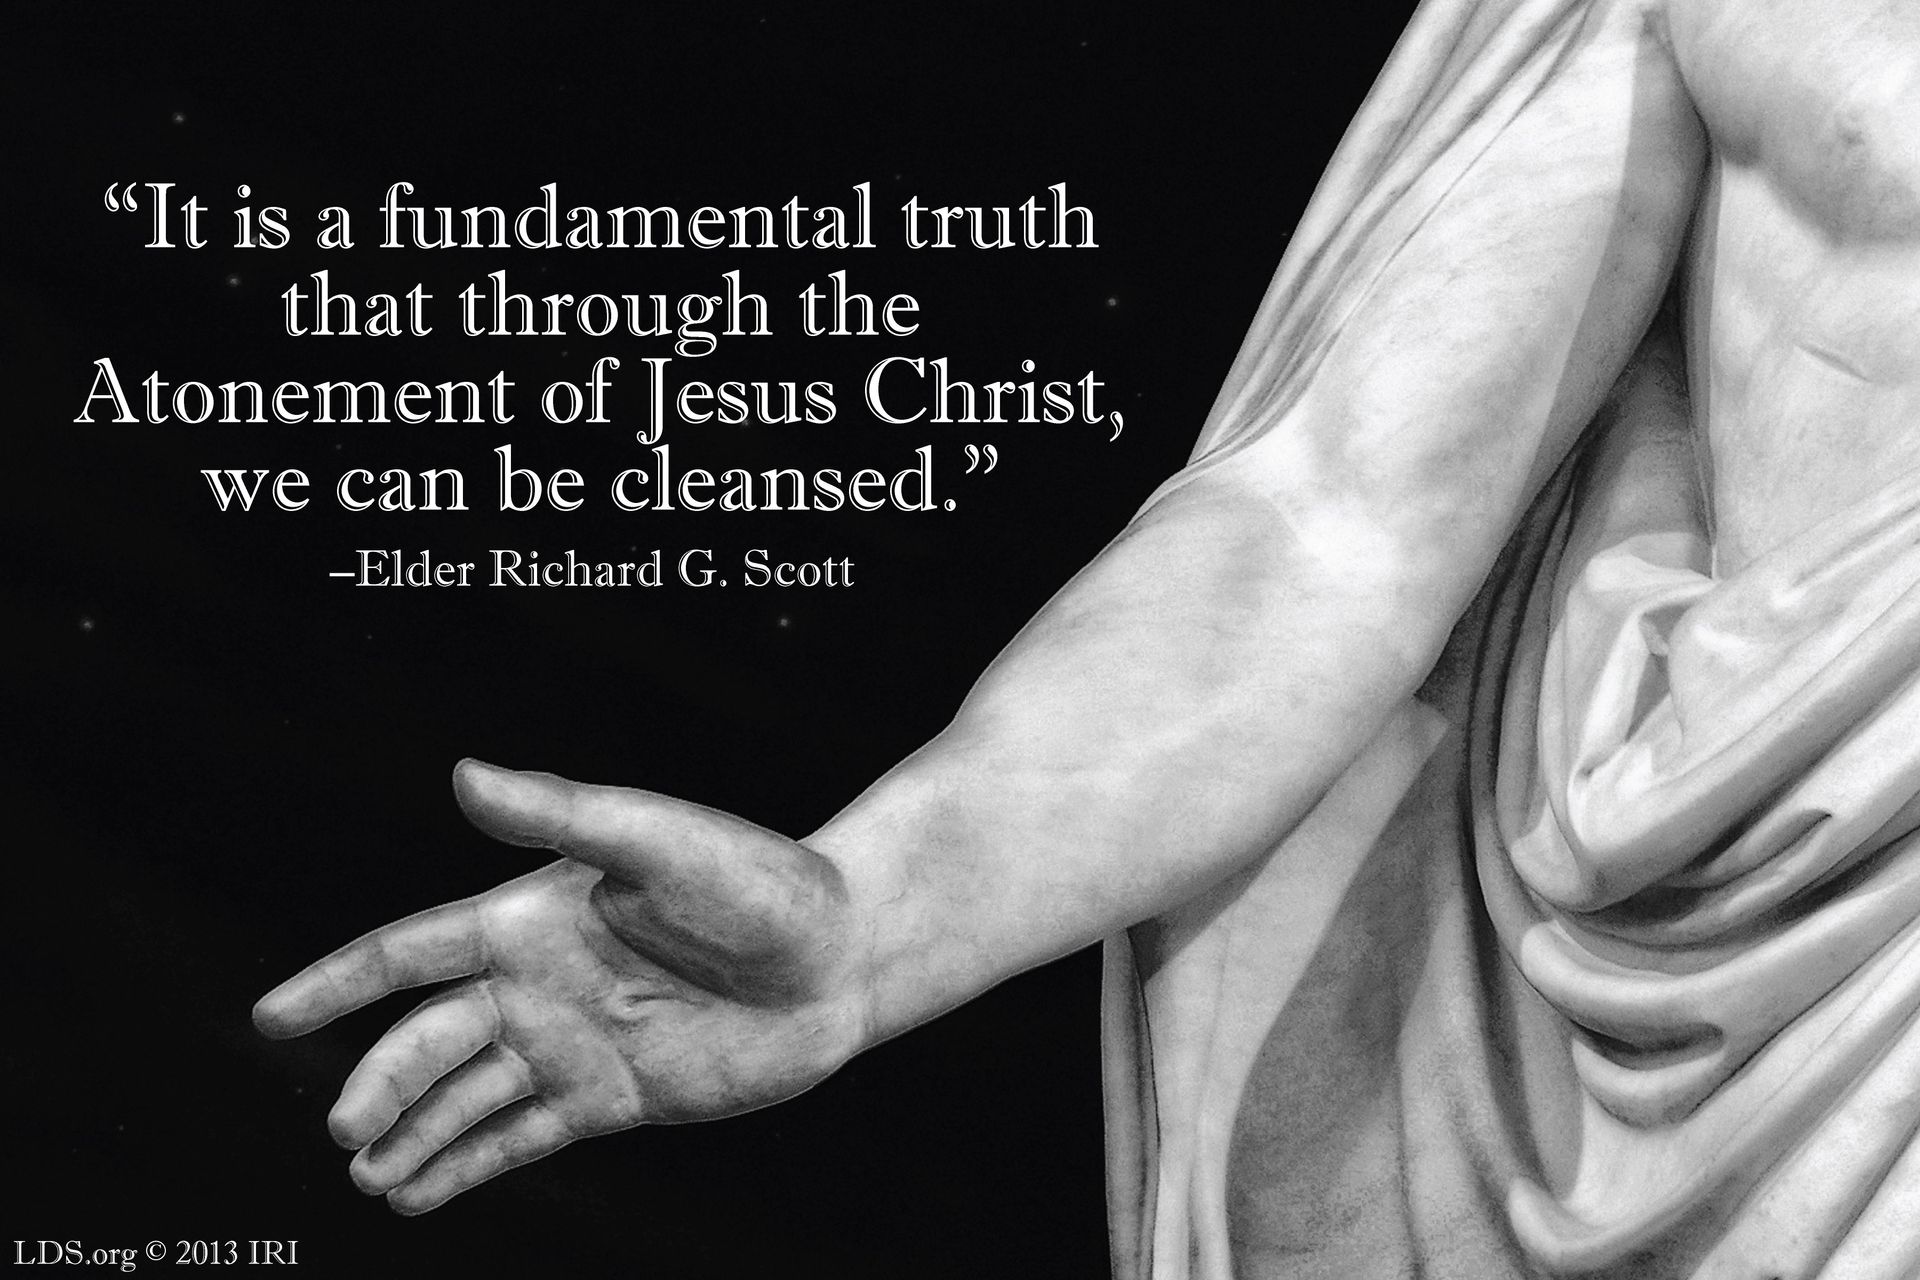 “It is a fundamental truth that through the Atonement of Jesus Christ we can be cleansed.”—Elder Richard G. Scott, “Personal Strength through the Atonement of Jesus Christ” © undefined ipCode 1.